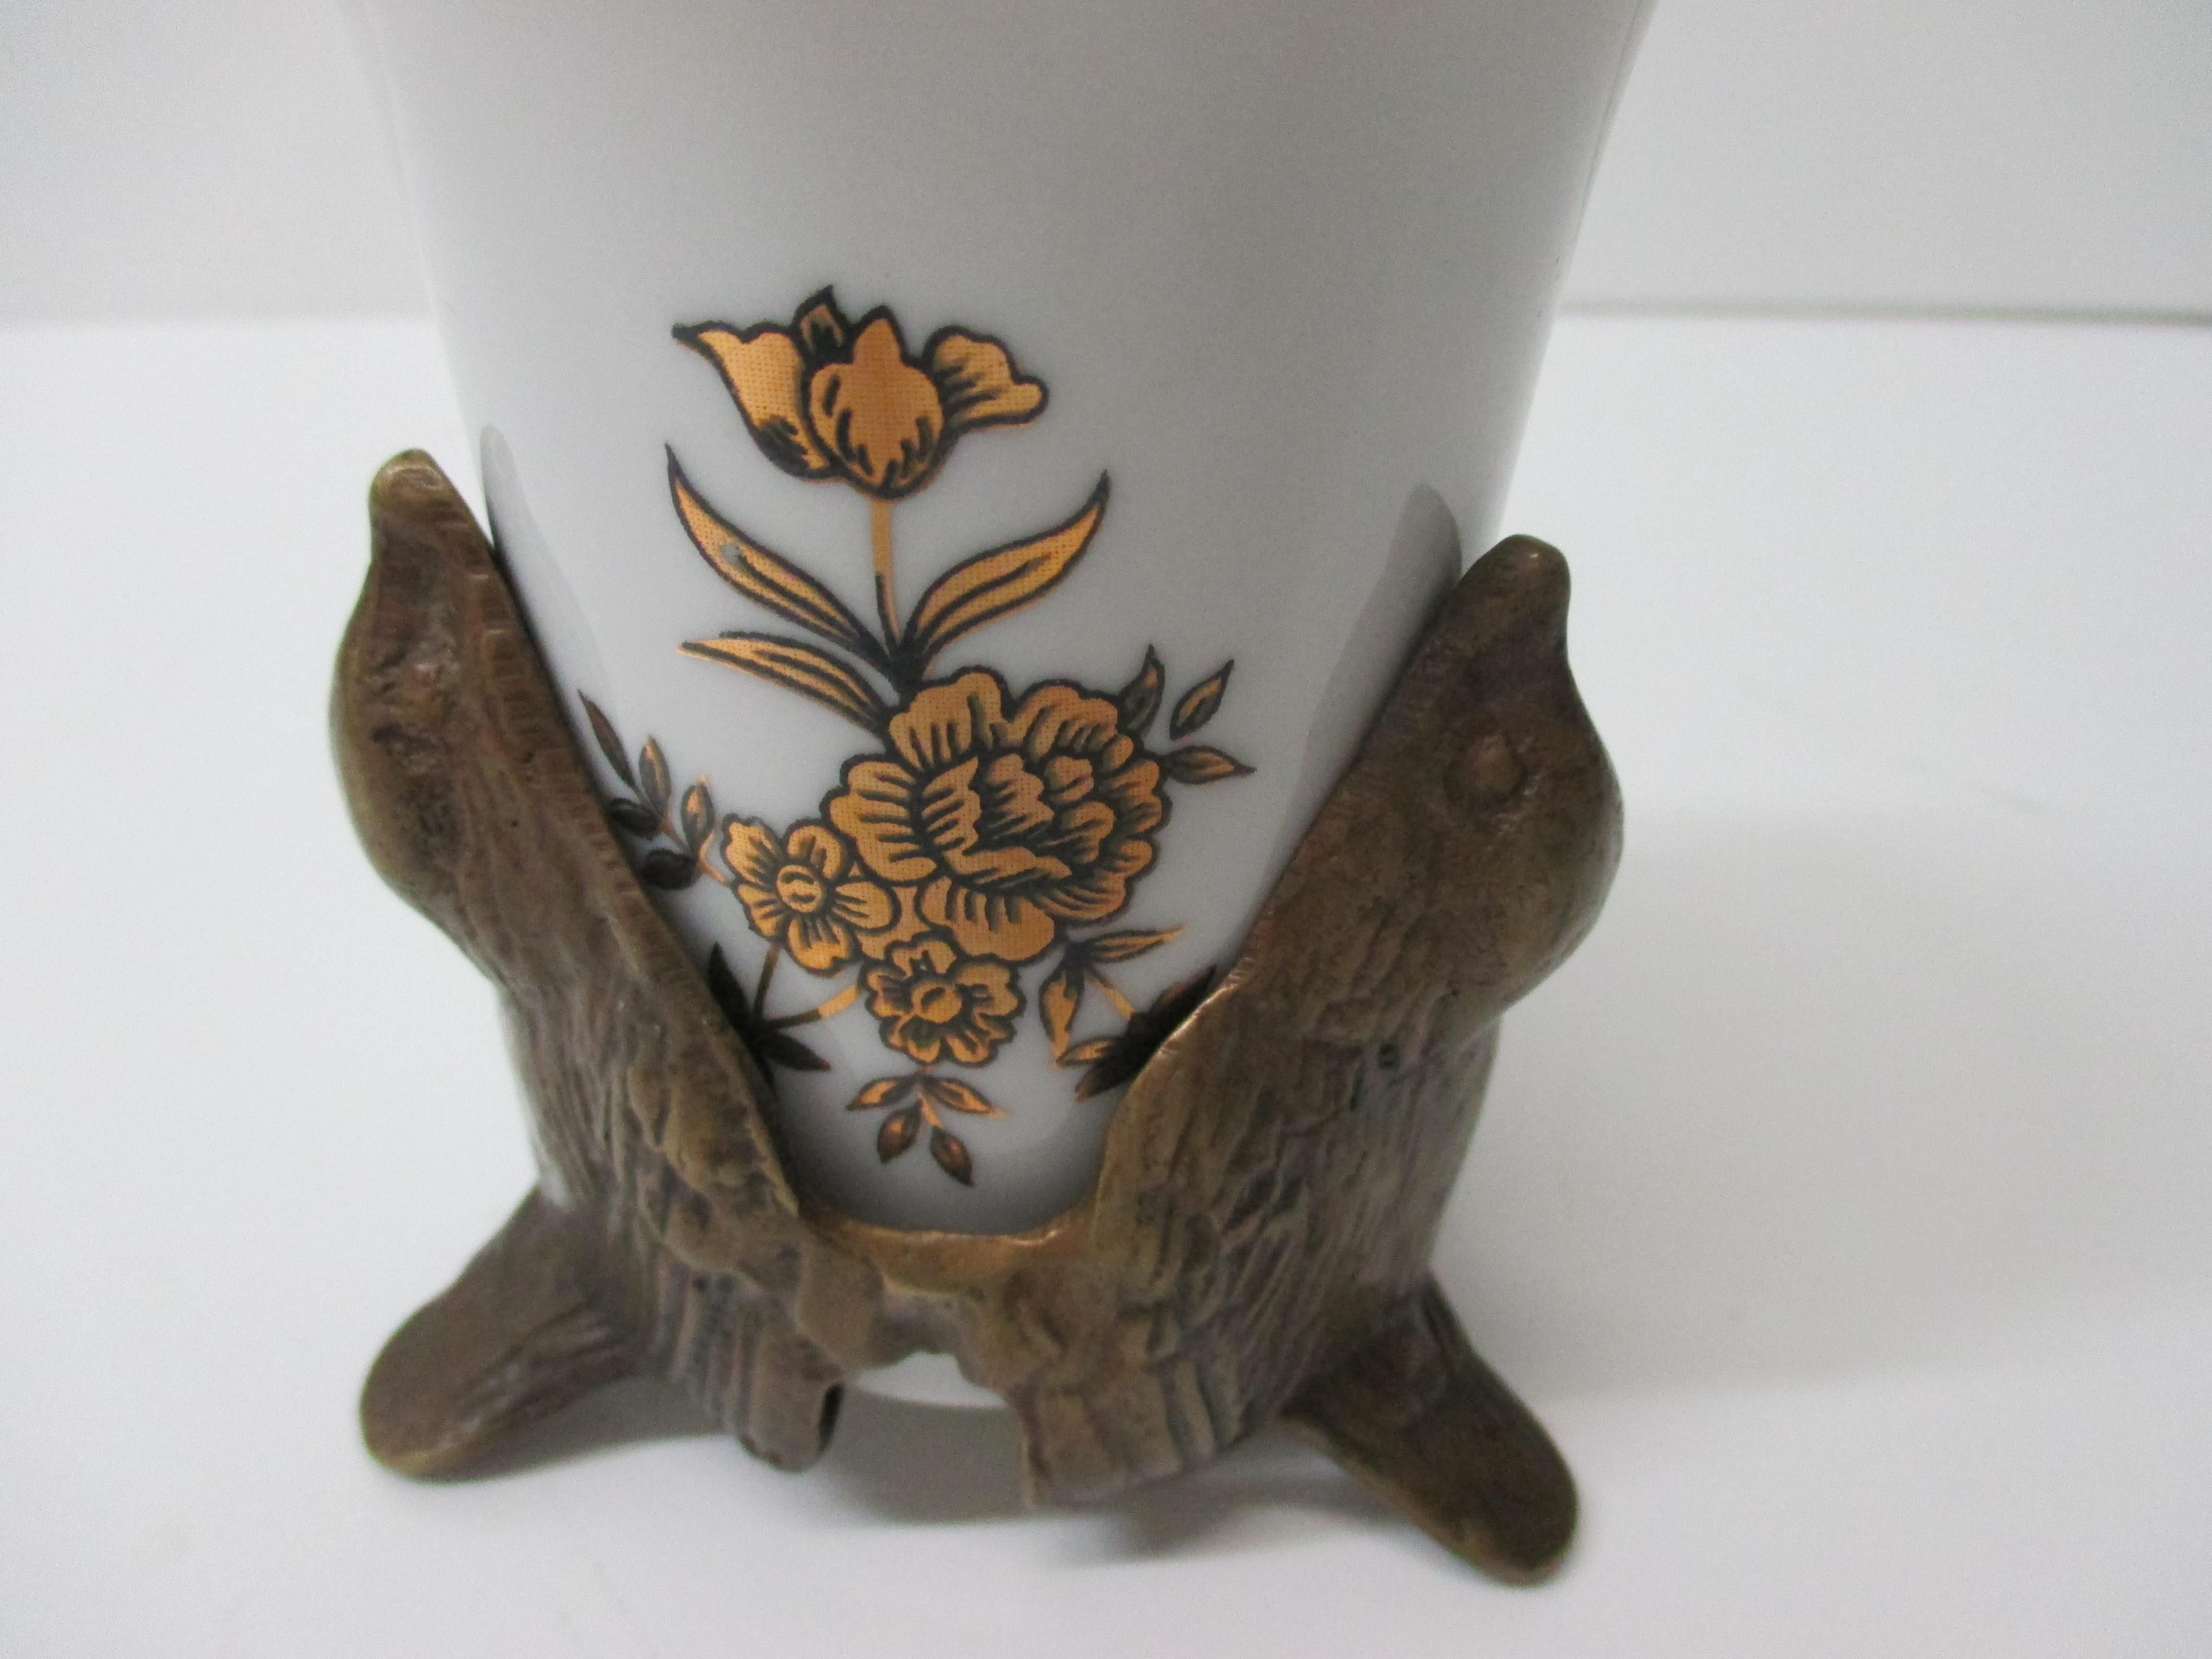 Vintage White and Gold Toothbrush Porcelain Cup With Brass Bird Stand.
With a brass birds base, holding the cup with a decorative motif of gold flowers in the front. 
Toothbrush holder or cup.
Size: 4 x 3.75 x 4